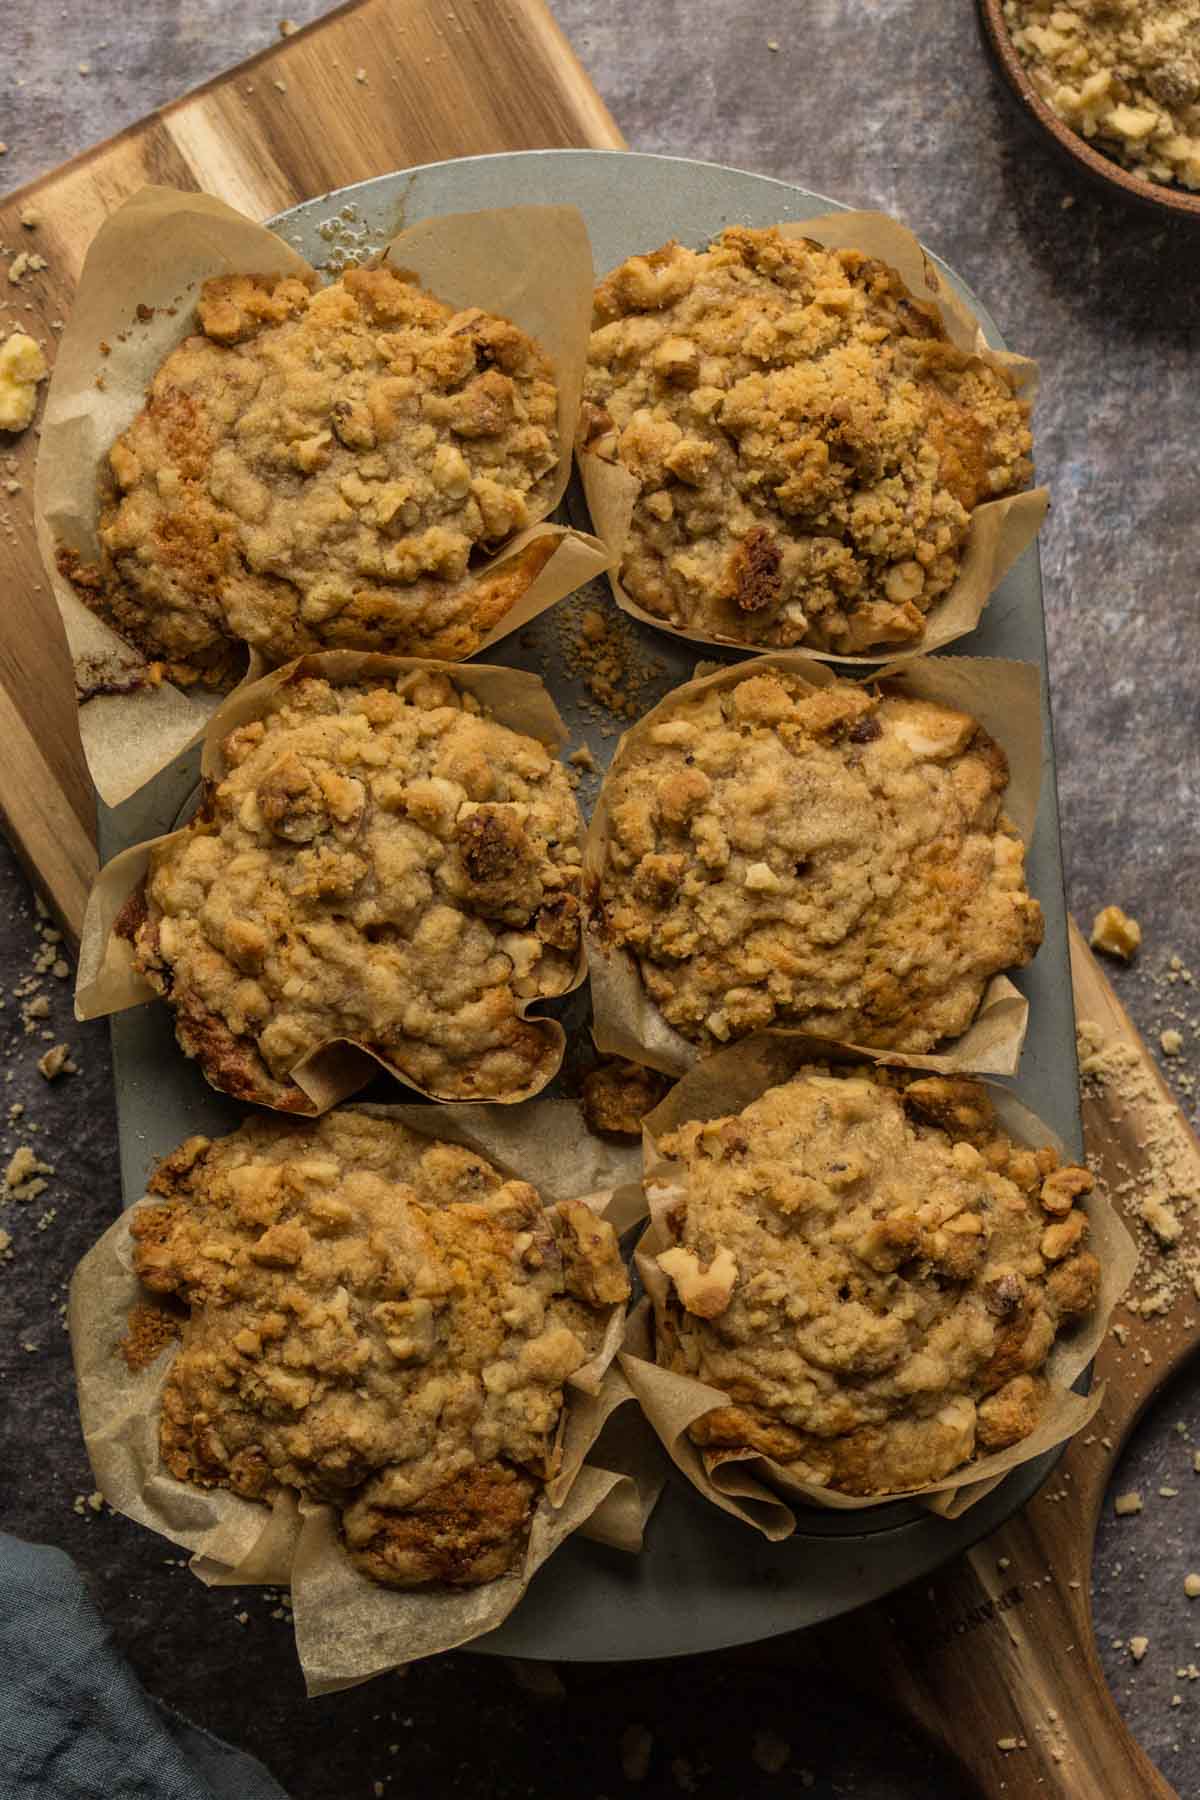 Banana muffins baked with streusel topping 